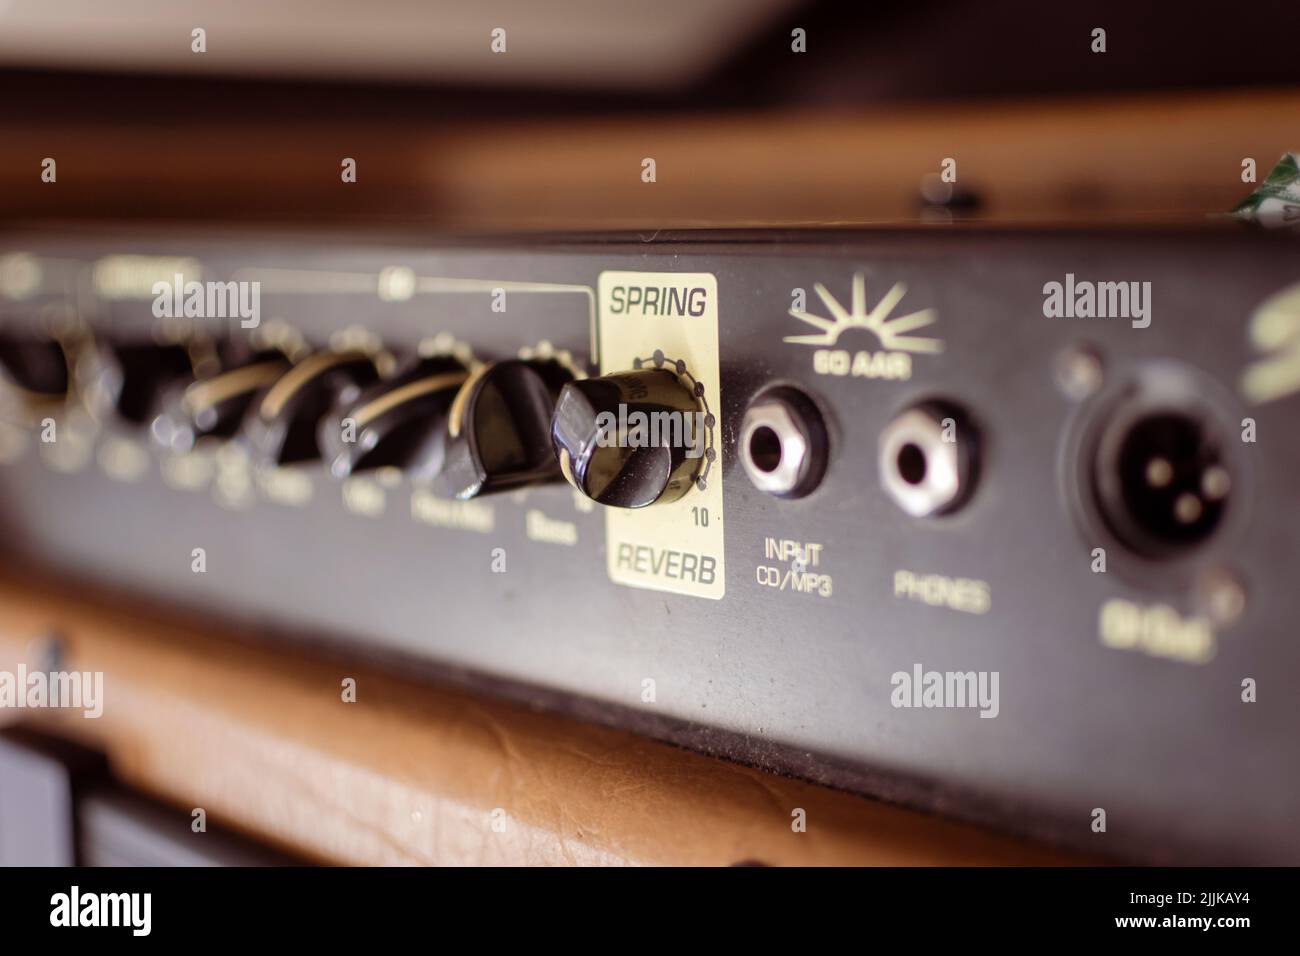 Guitar amp with reverb switch and inputs in focus. Stock Photo